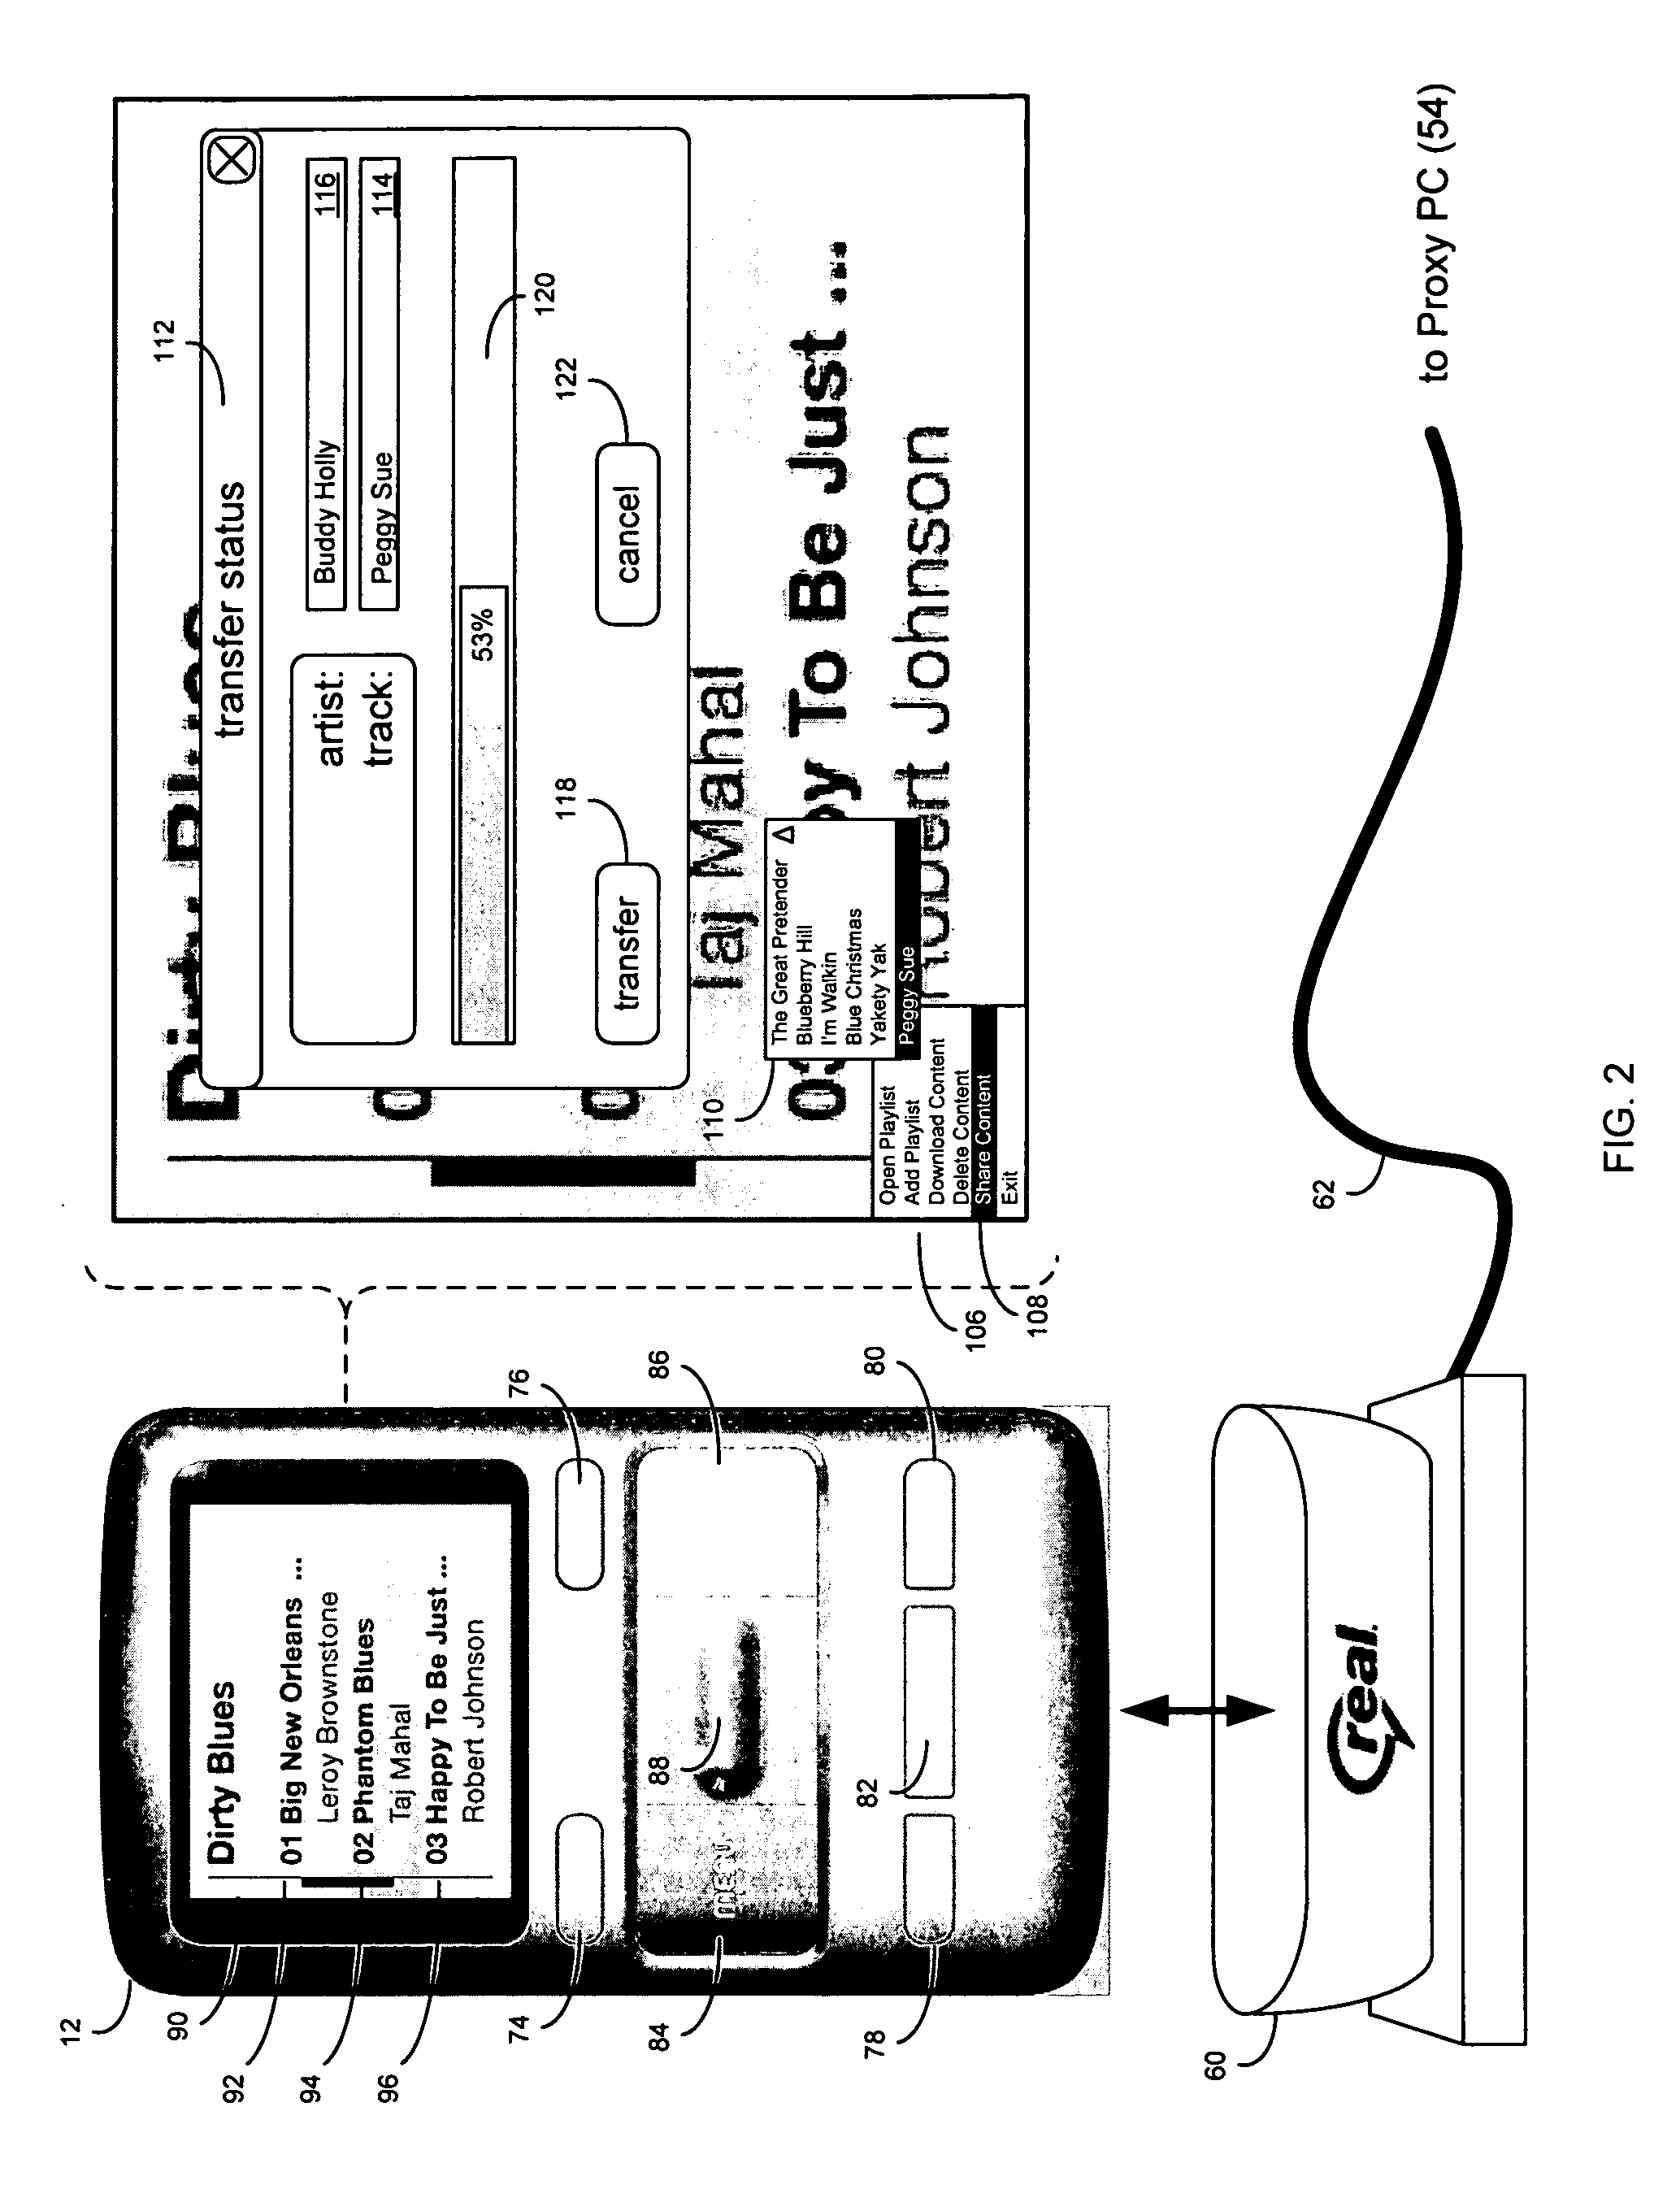 System and method for automatically managing media content